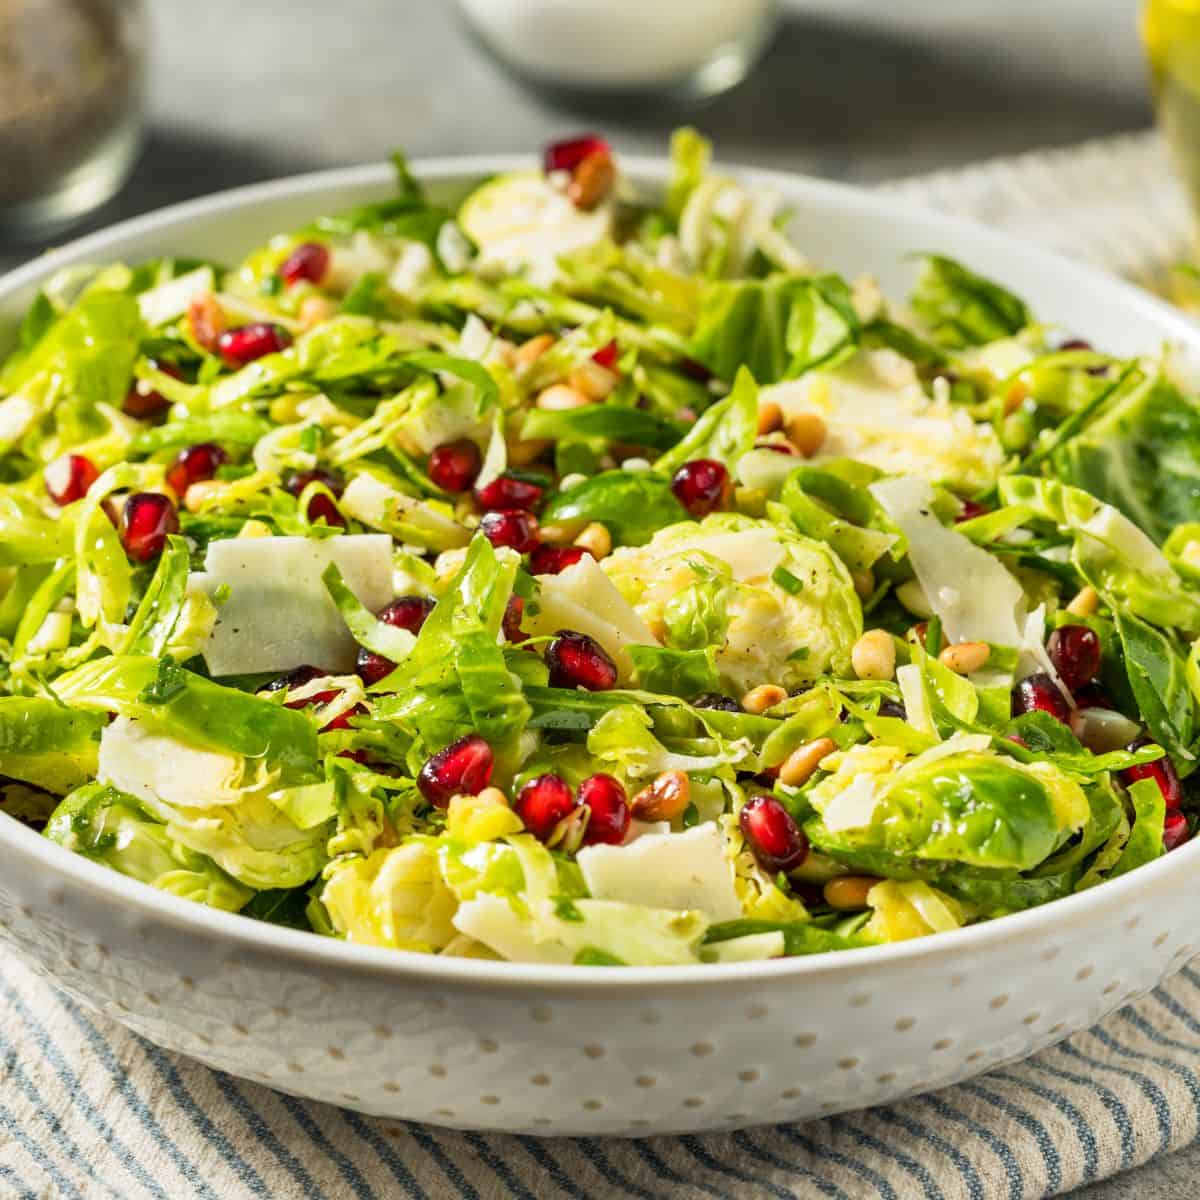 A bowl of brussels sprouts salad with pomegranate.